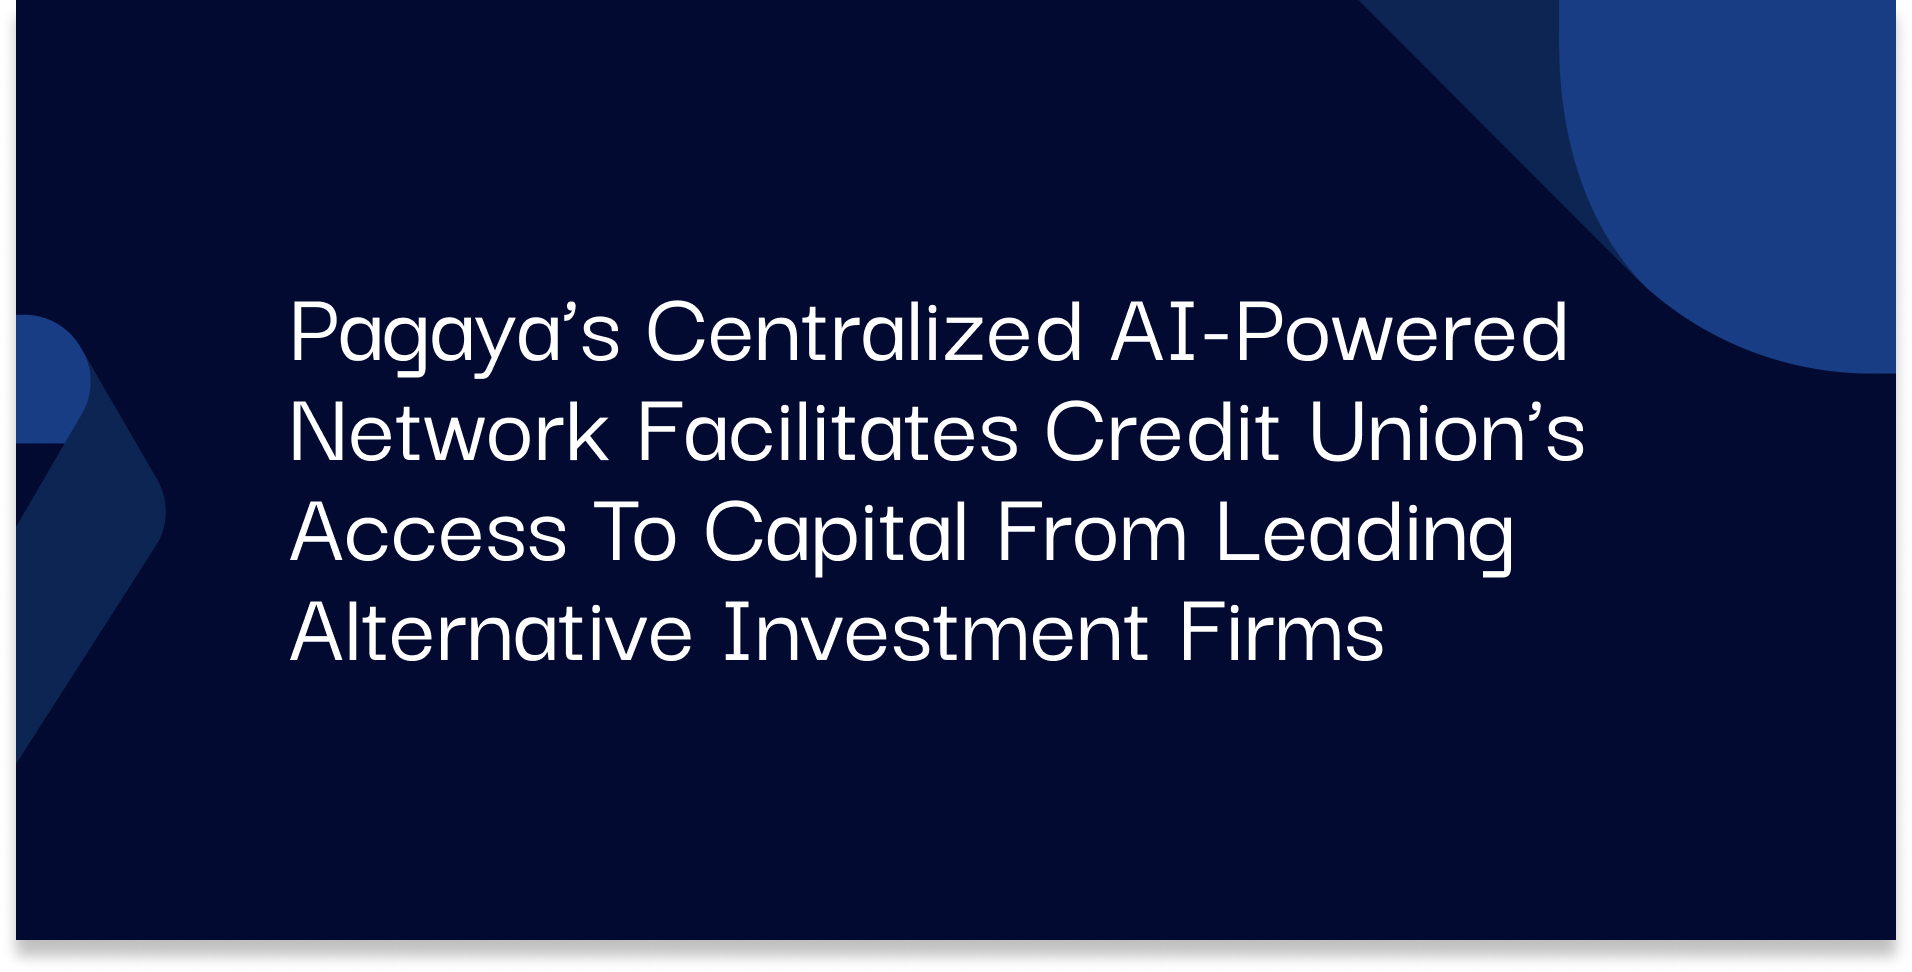 Pagaya’s Centralized AI-Powered Network Facilitates Credit Union’s Access to Capital from Leading Alternative Investment Firms